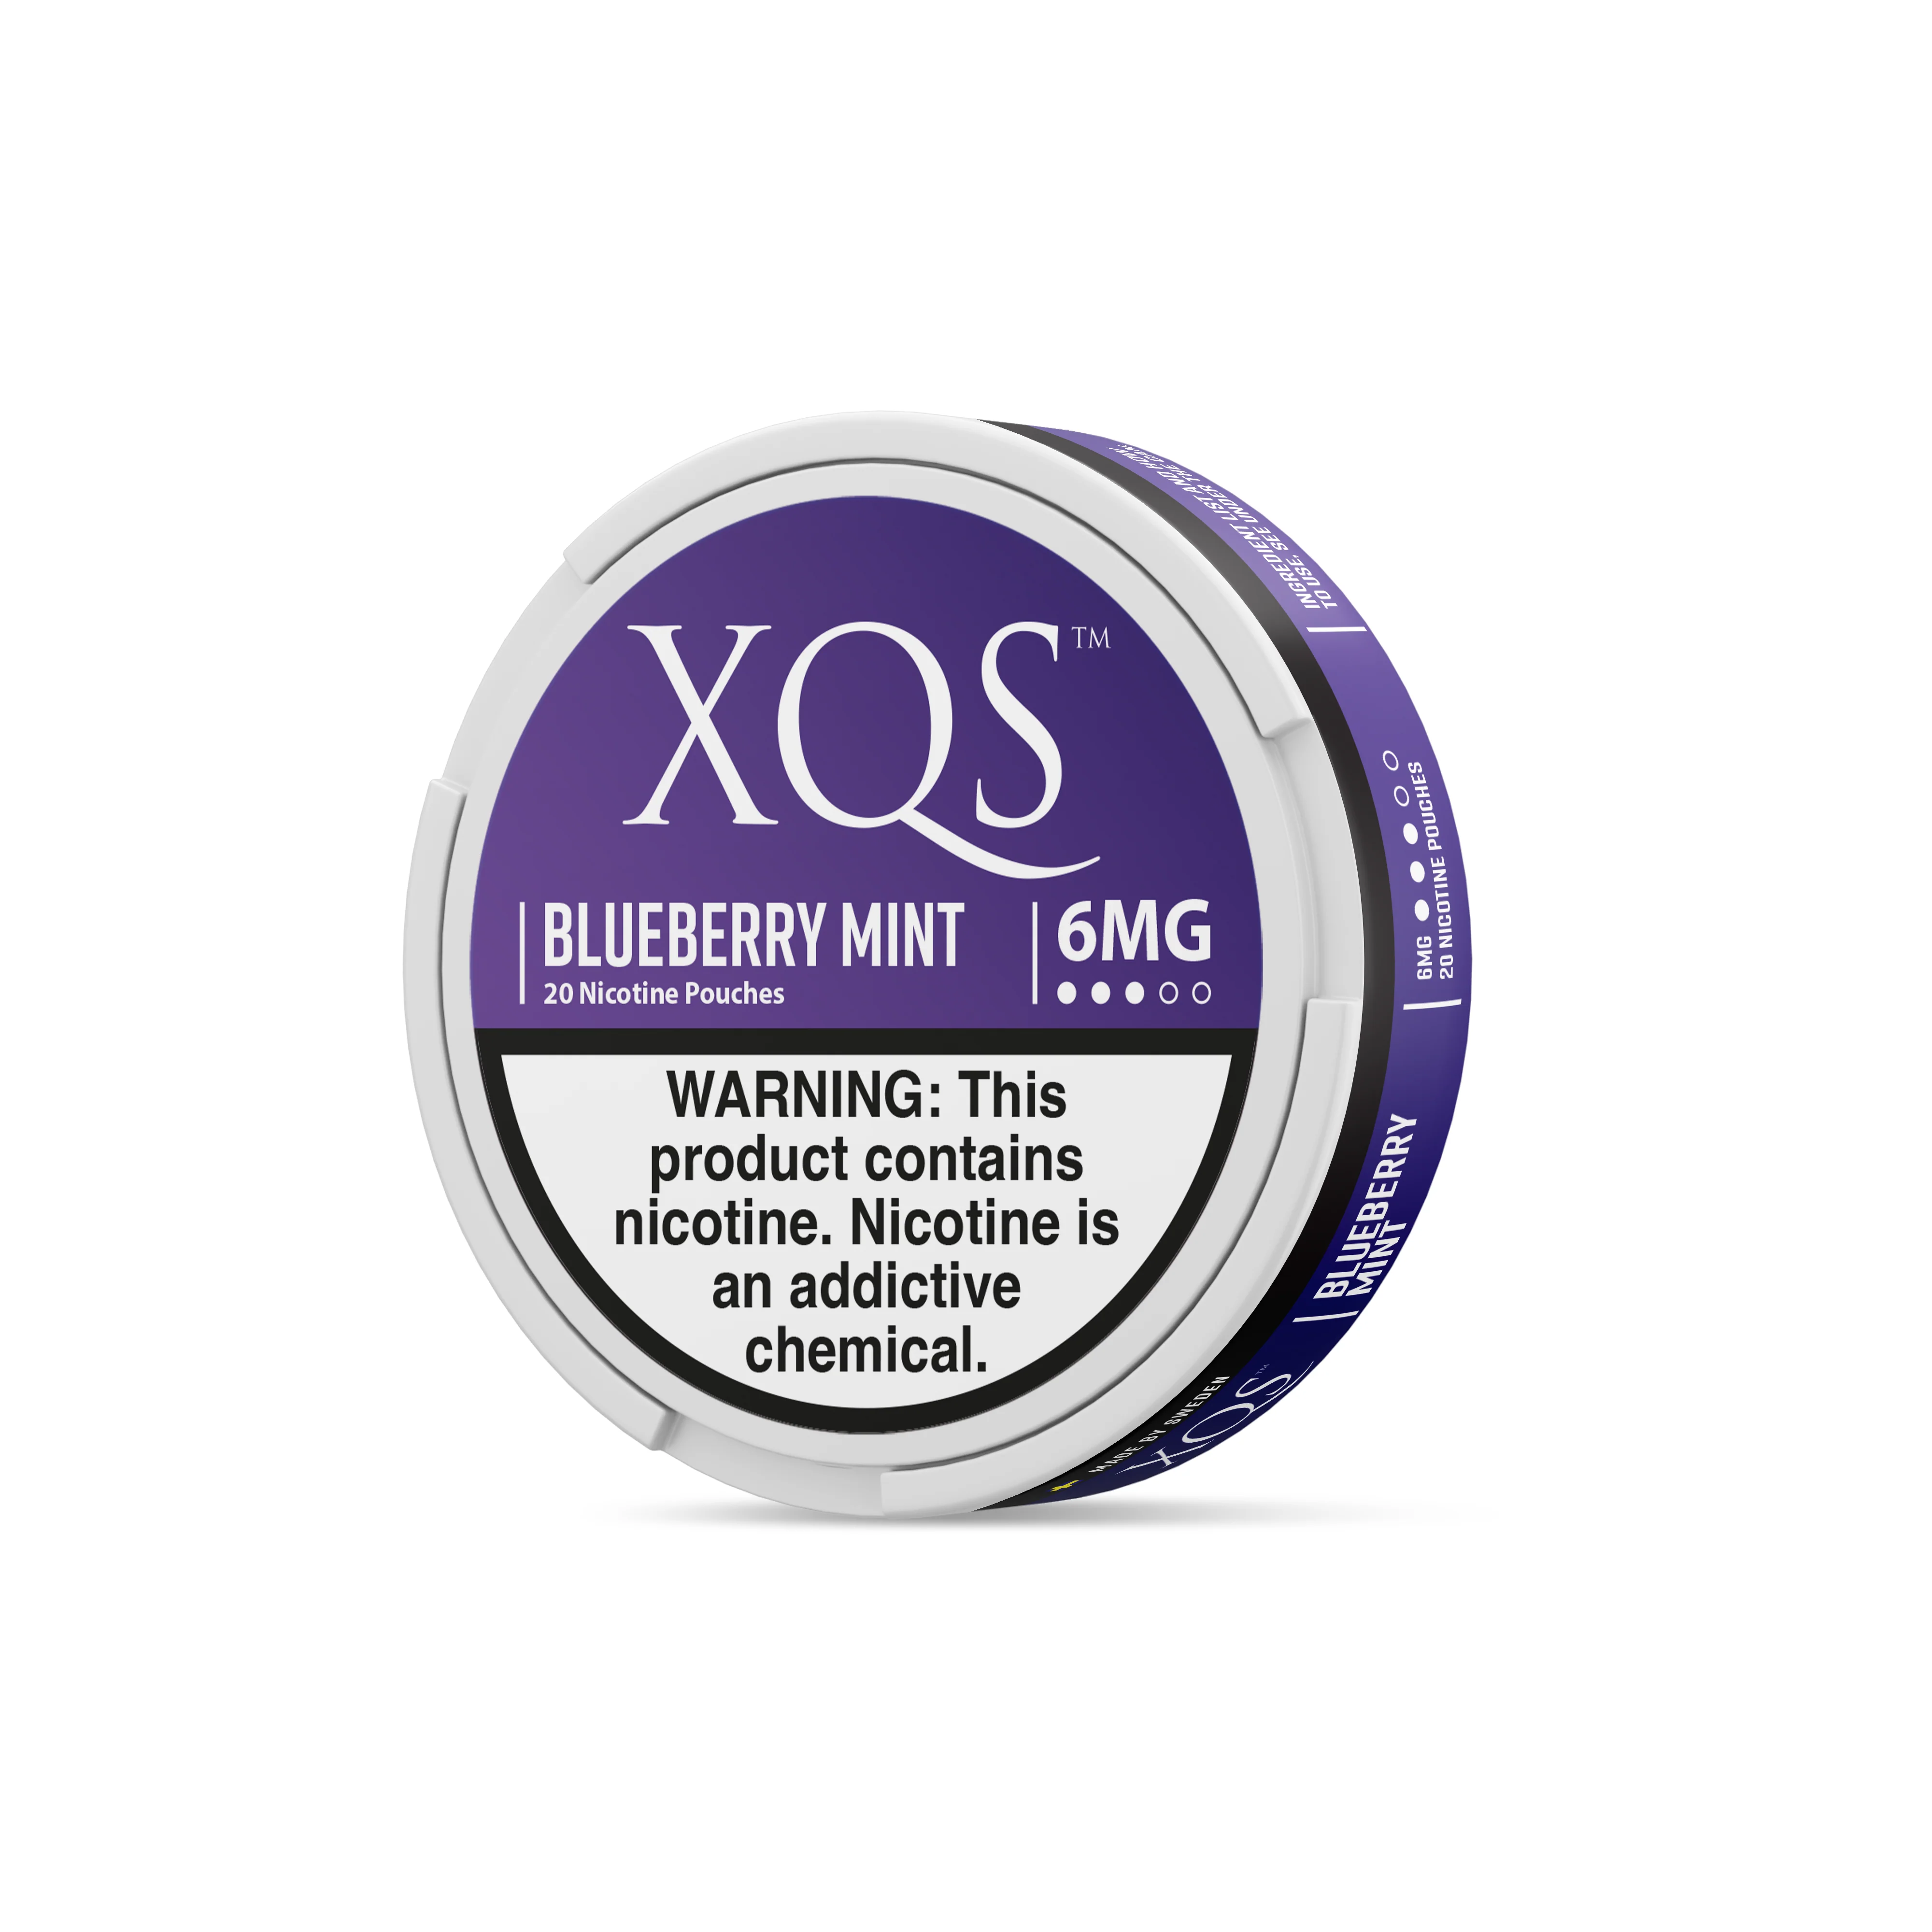 Xqs blueberry mint 6mg nicotine pouch